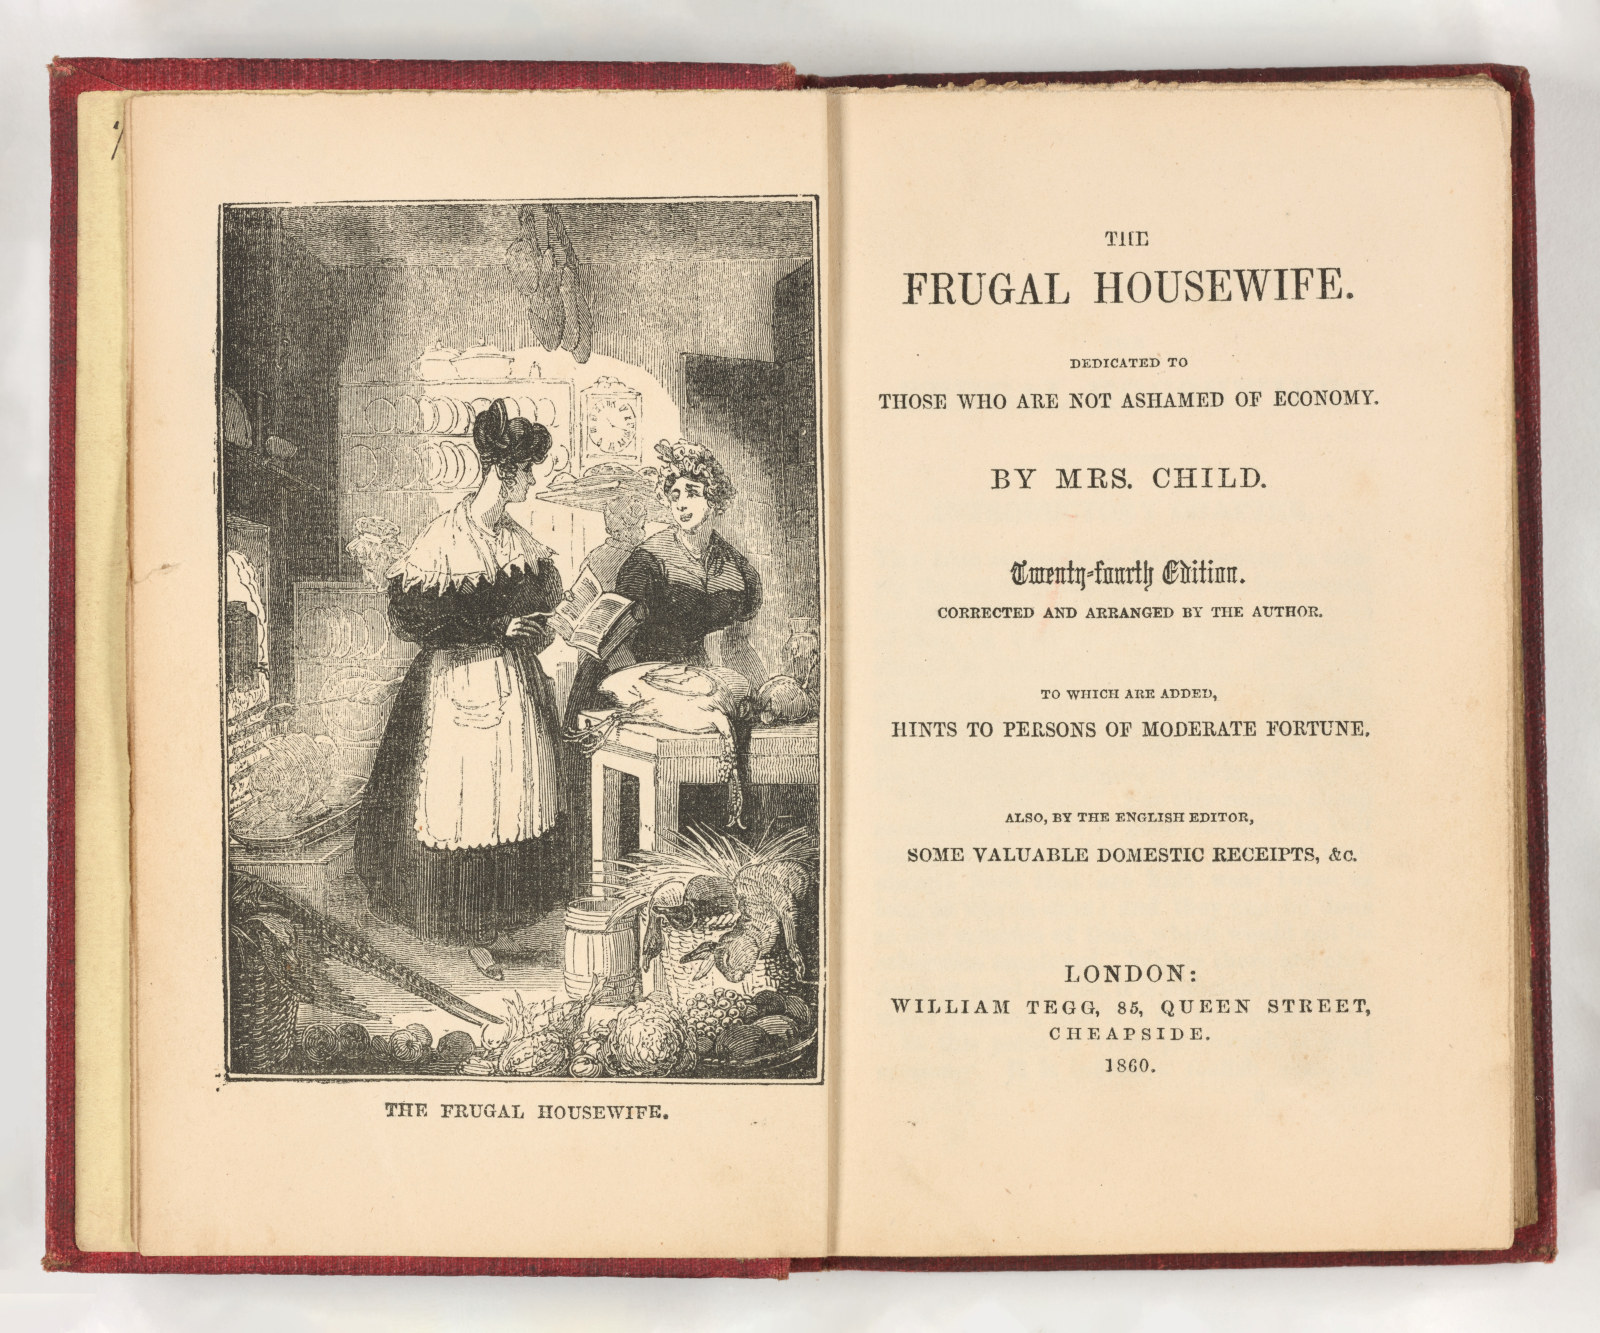 Open book with an image of two maids in a kitchen on the left